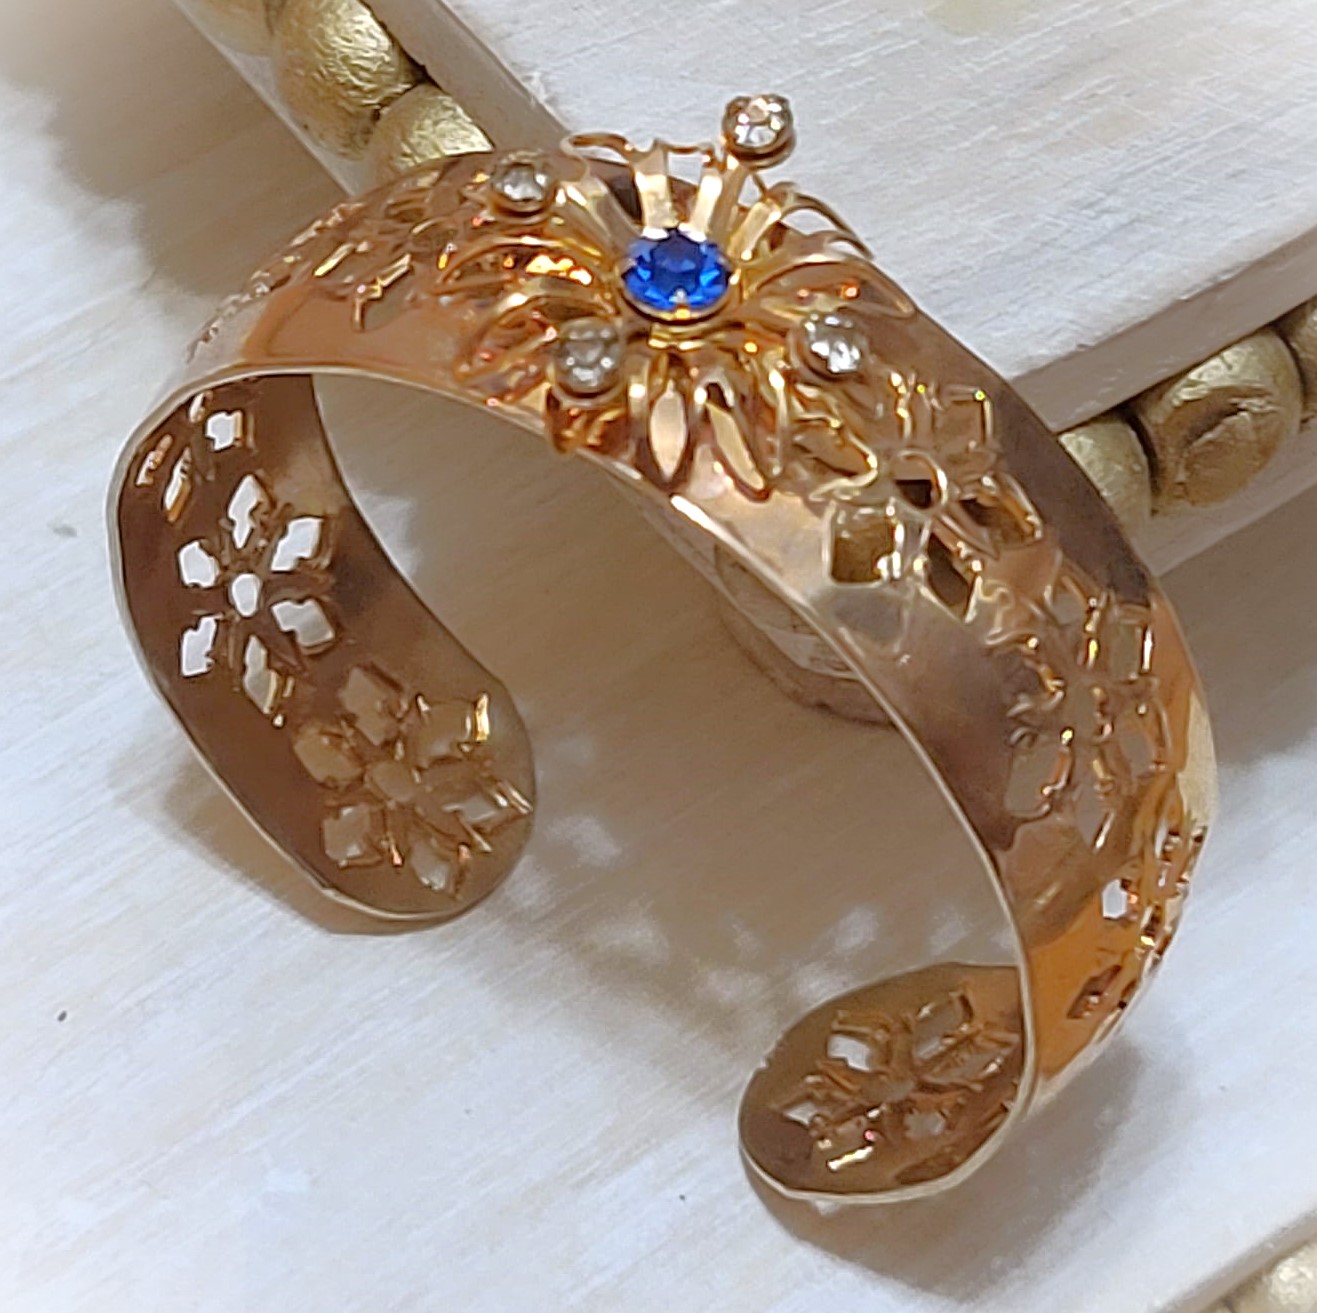 Copper cuff bracelet with cutout design with blue and white rhinestones, vintage bracelet